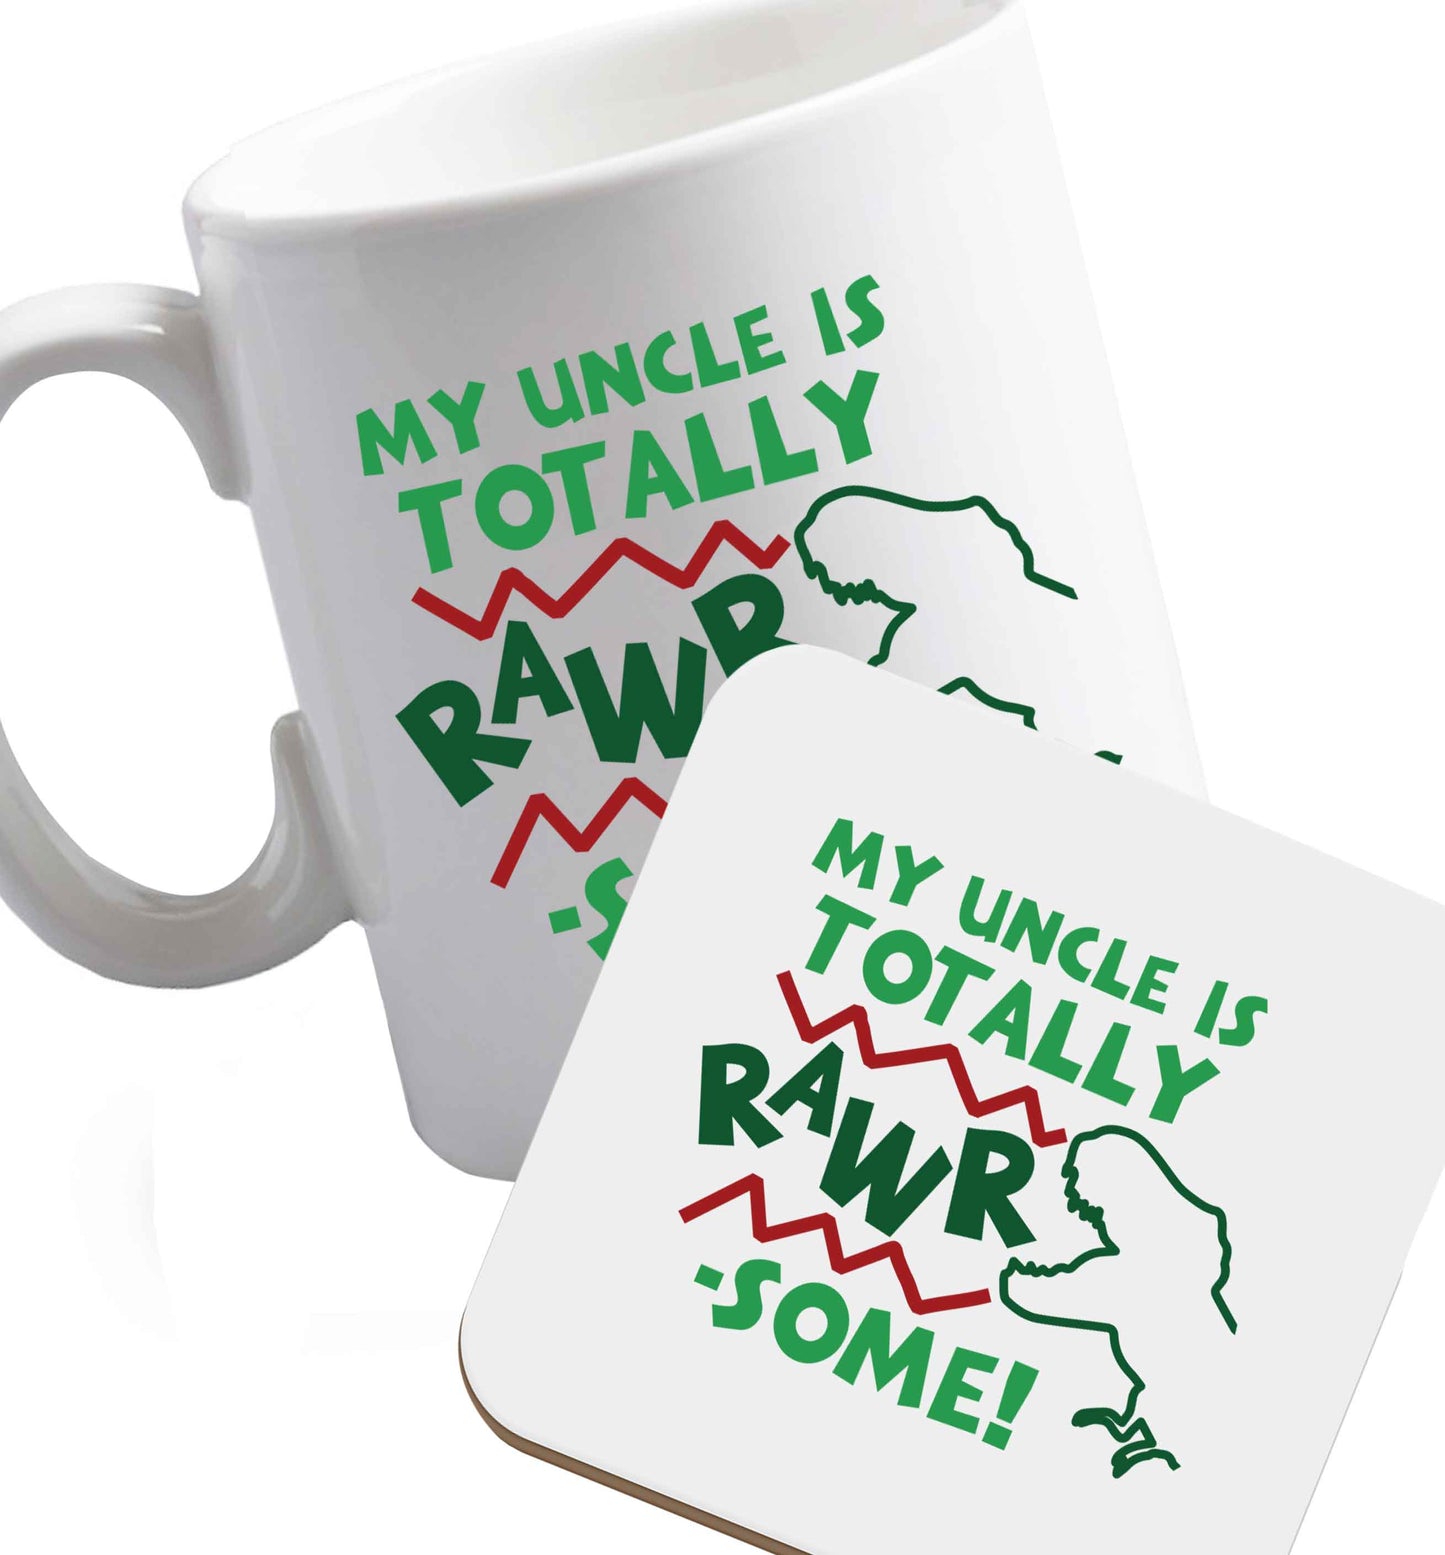 10 oz My uncle is totally rawrsome ceramic mug and coaster set right handed